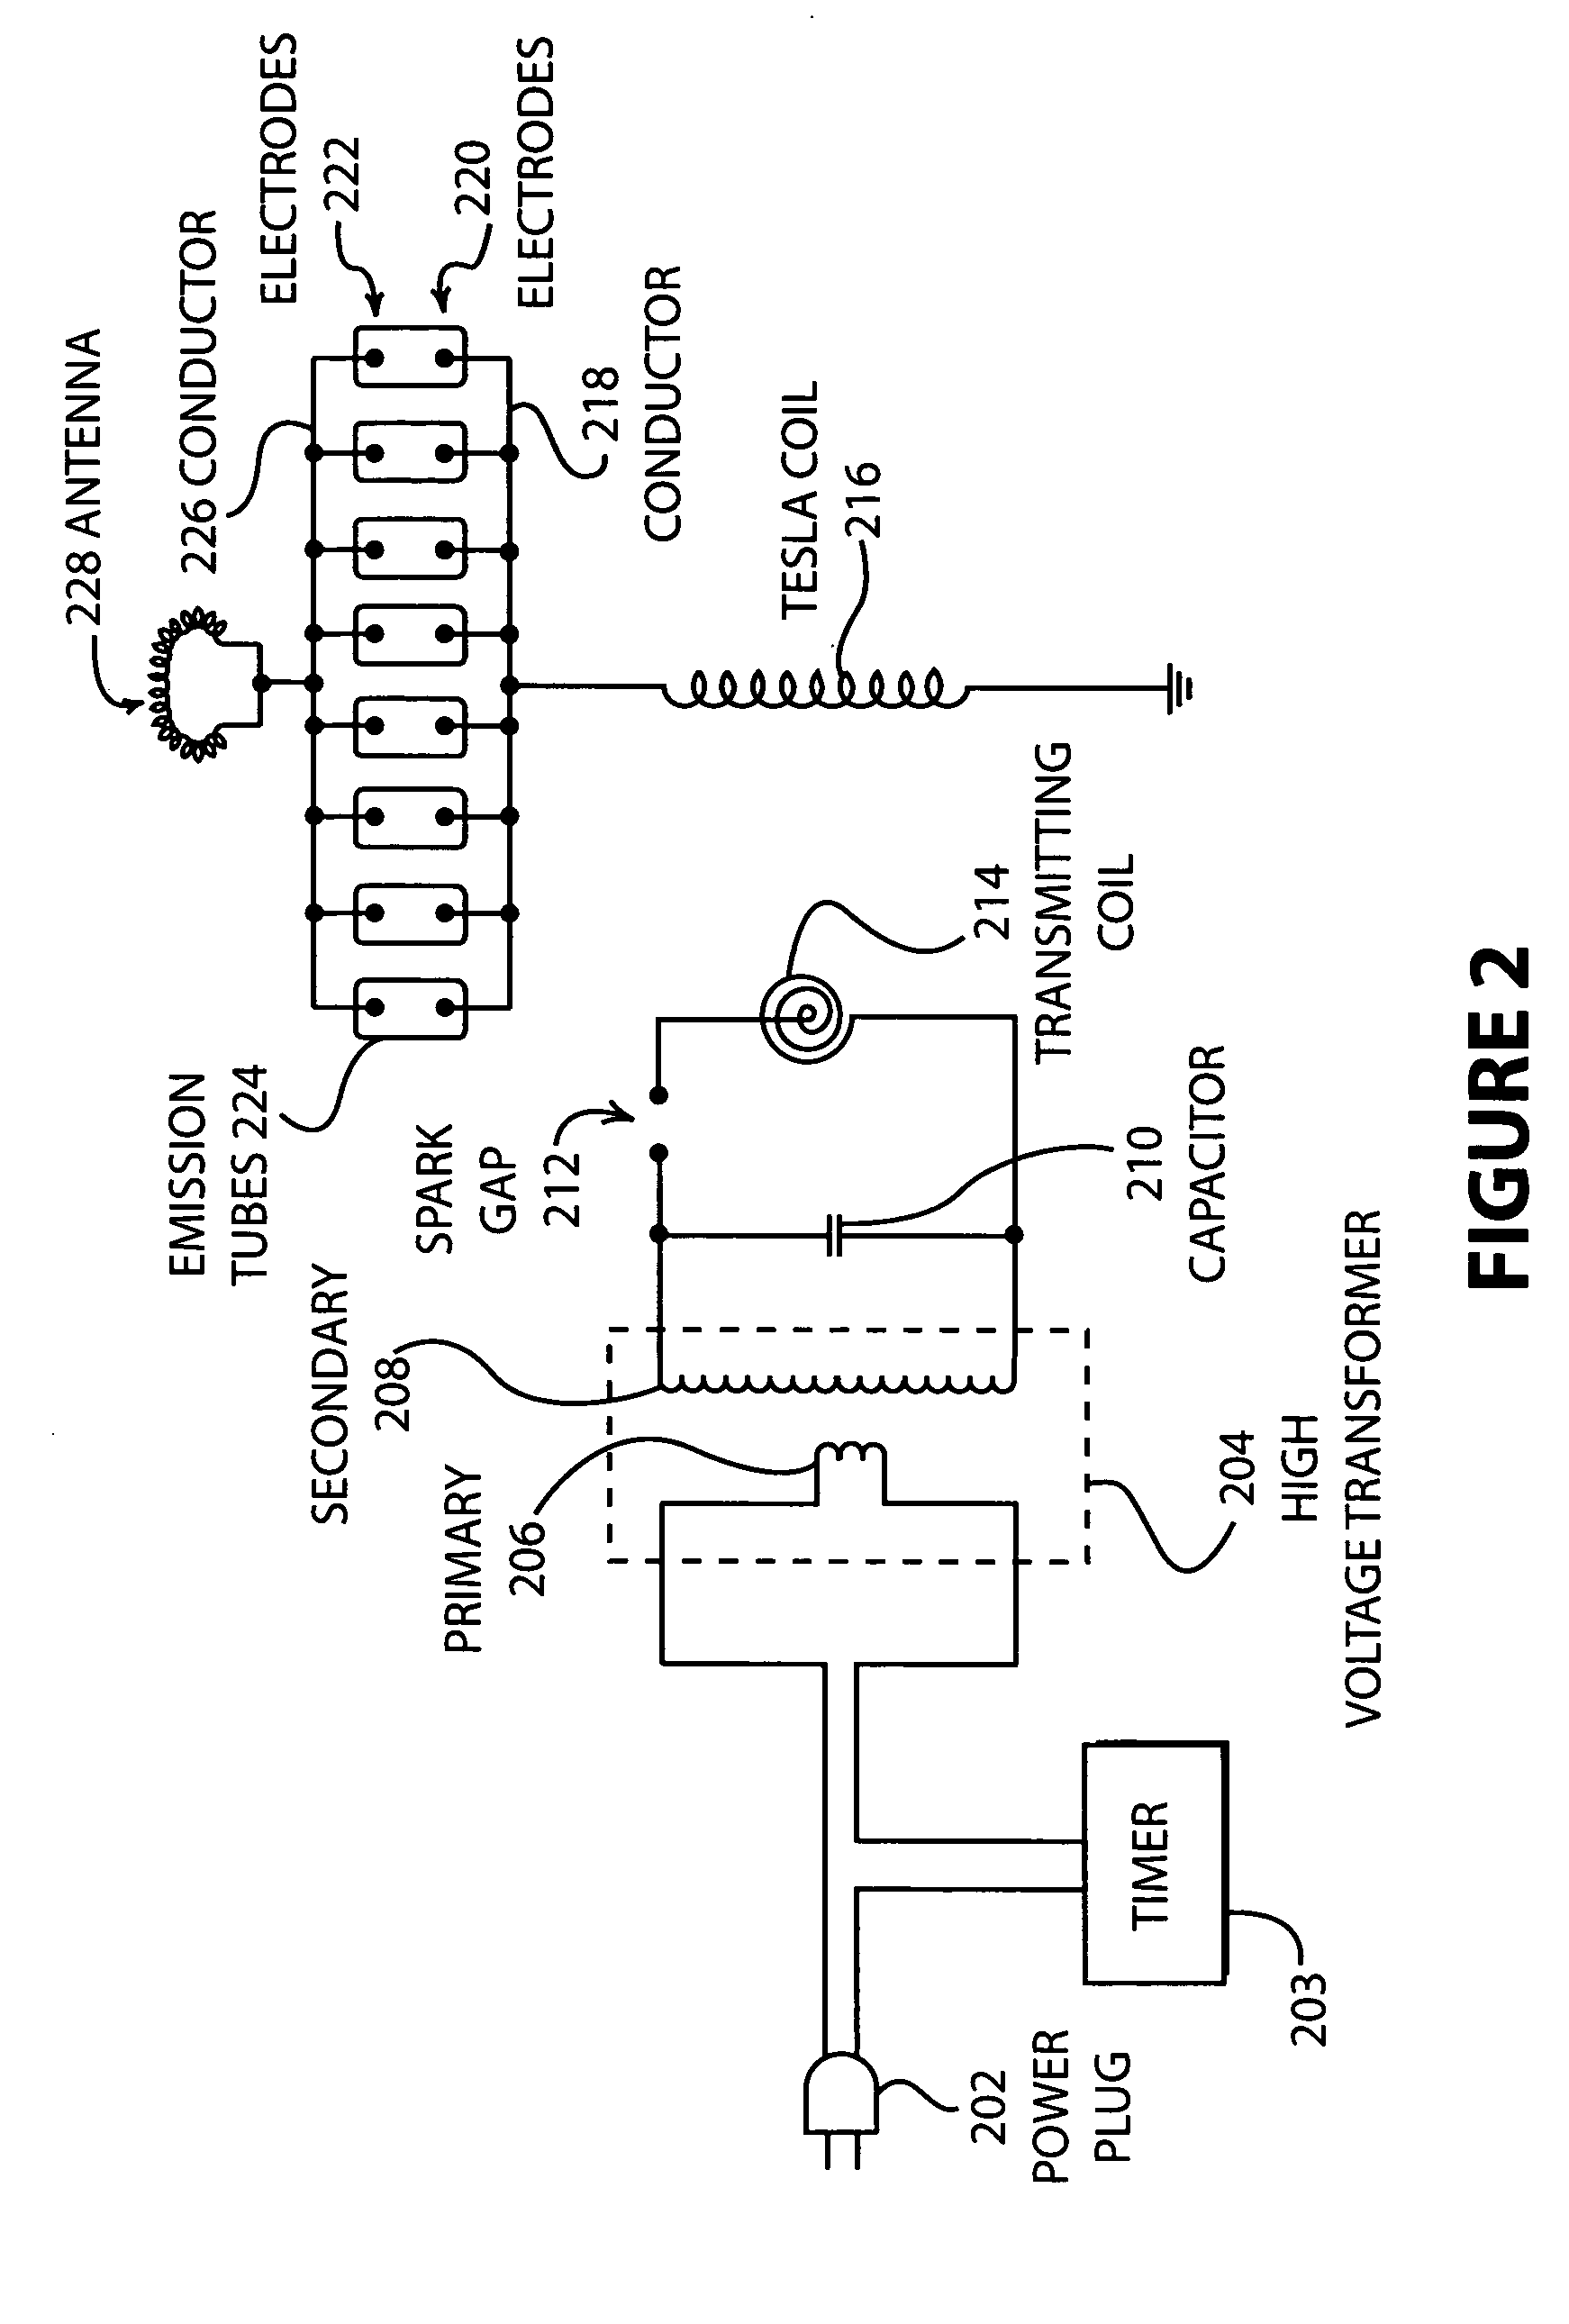 Multifrequency electro-magnetic field generator